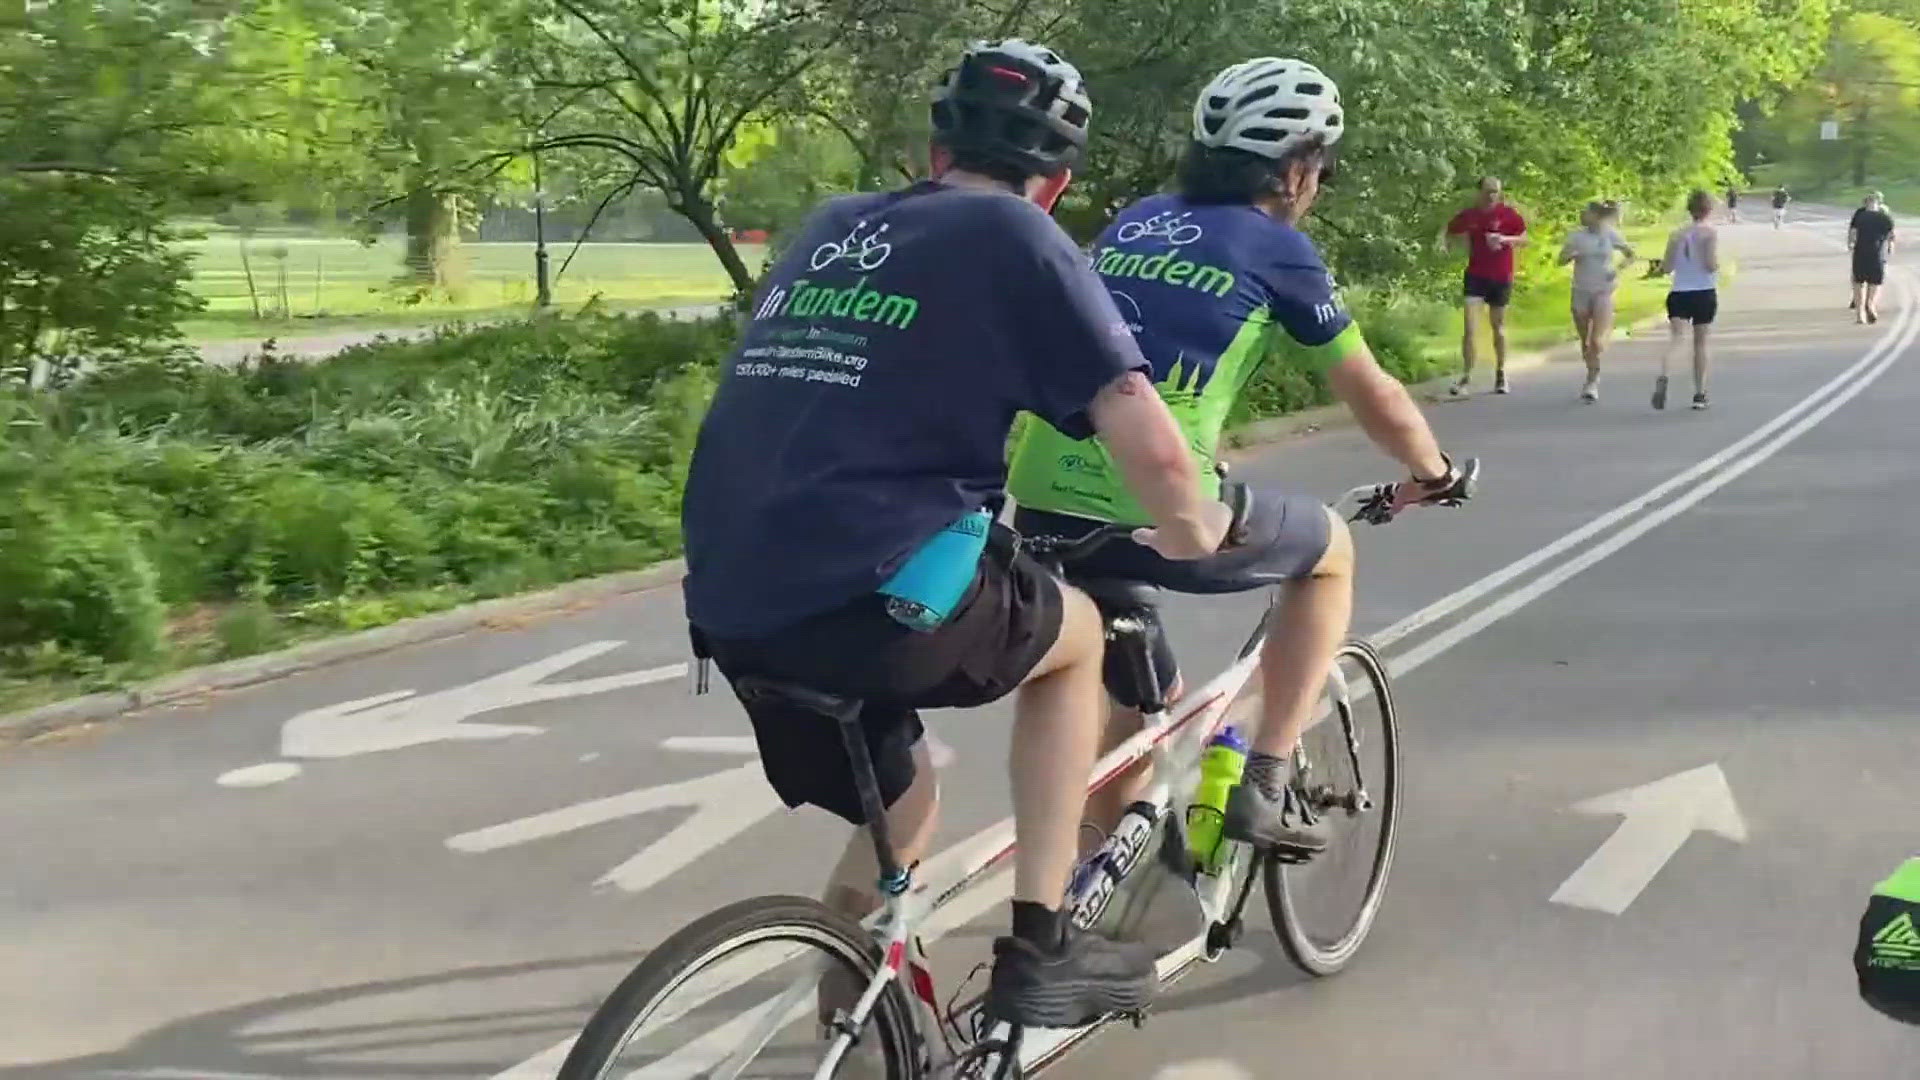 Turn down the green heart of Manhattan and people will see InTandem, an organization helping blind and disabled people participate in bicycling.